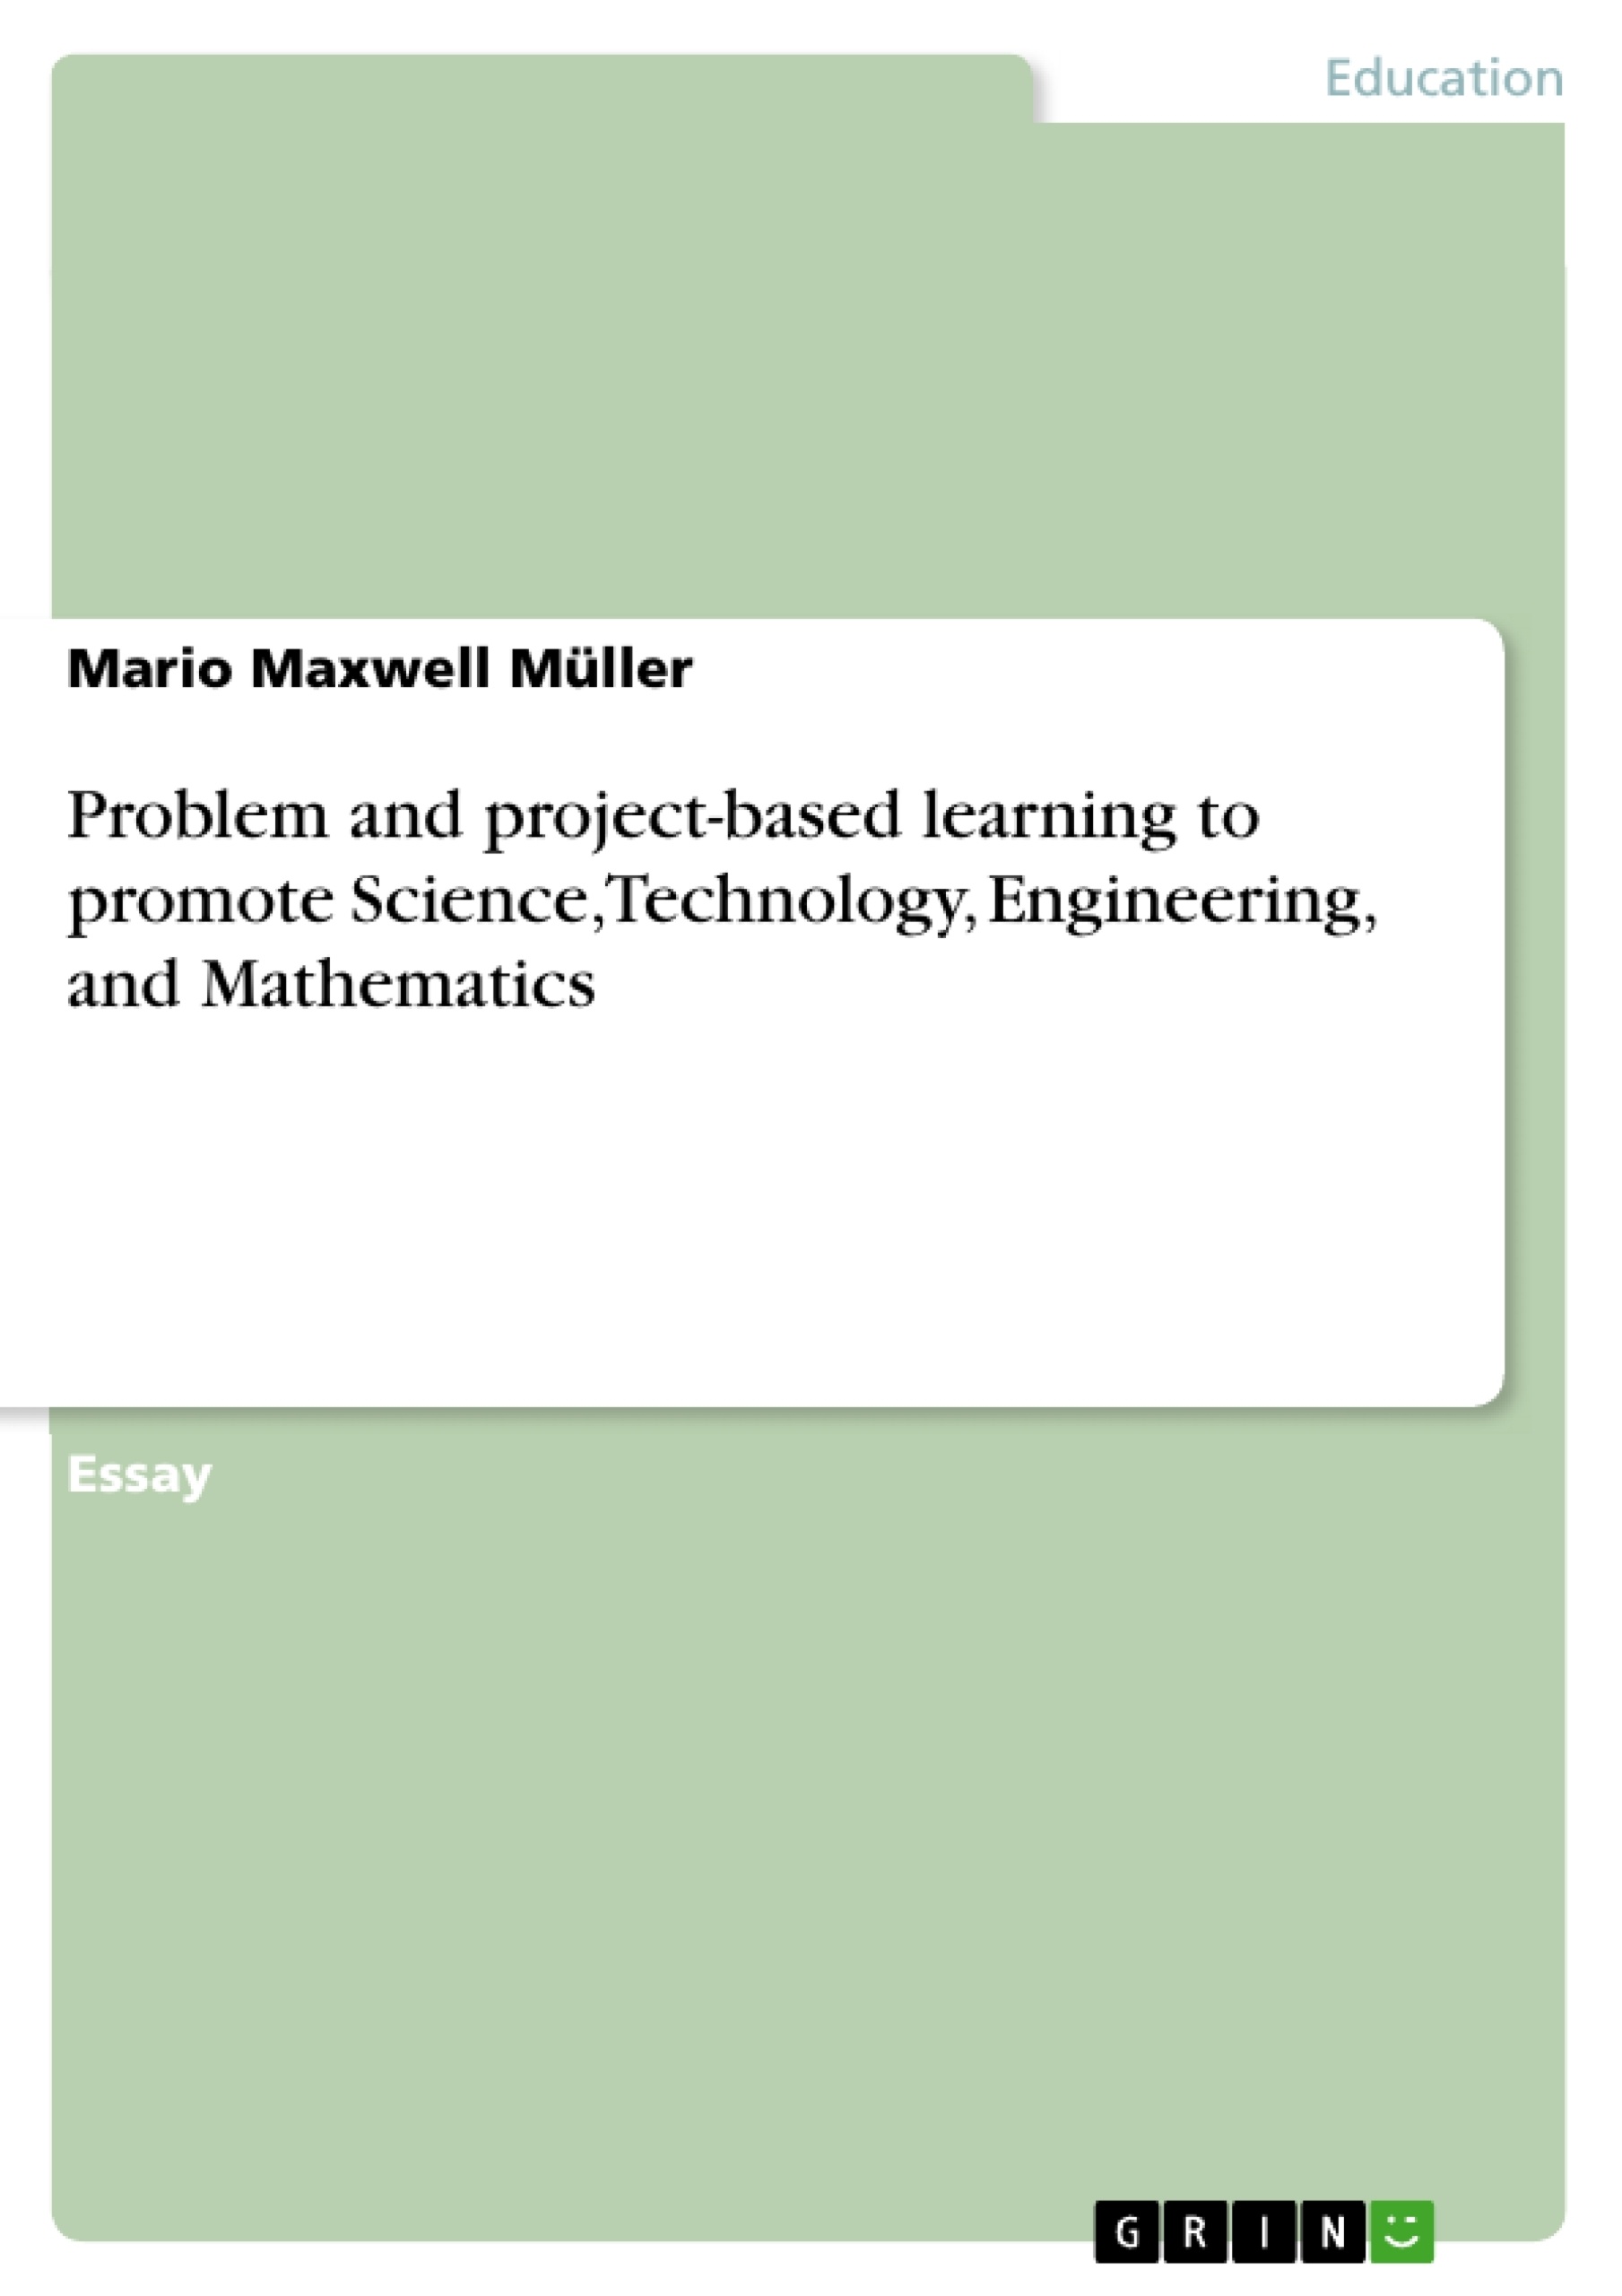 Title: Problem and project-based learning to promote Science, Technology, Engineering, and Mathematics